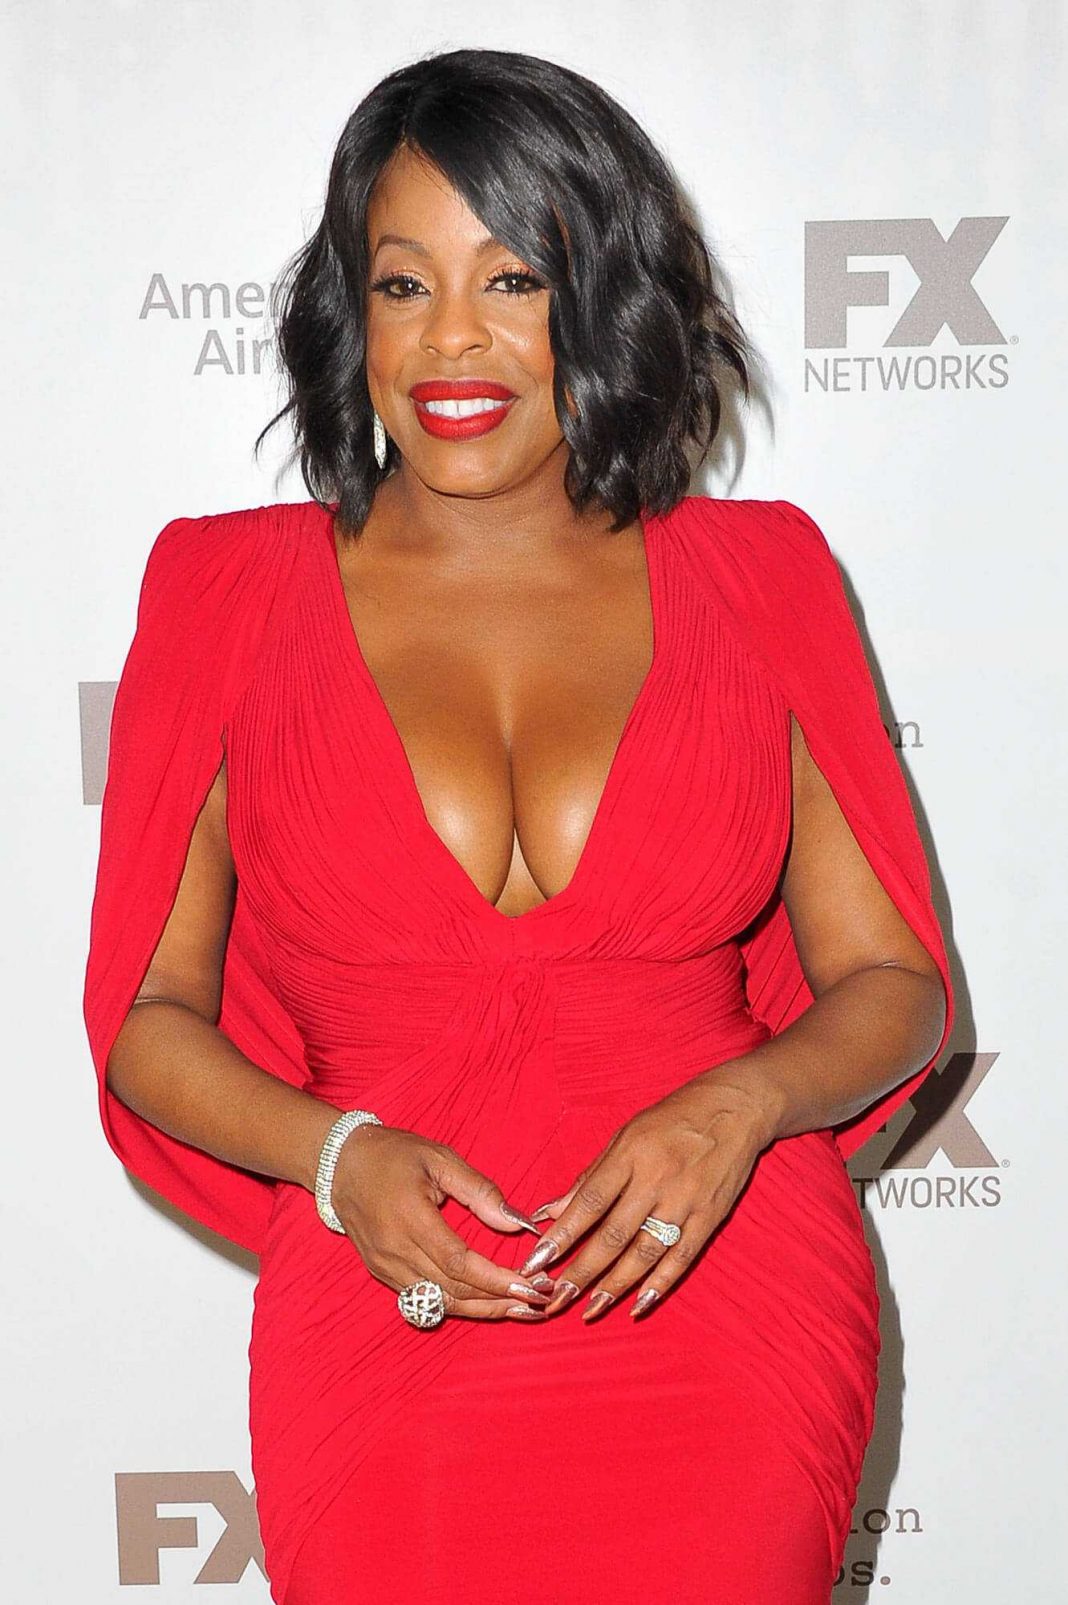 46 Niecy Nash Nude Pictures Display Her As A Skilled Performer 31